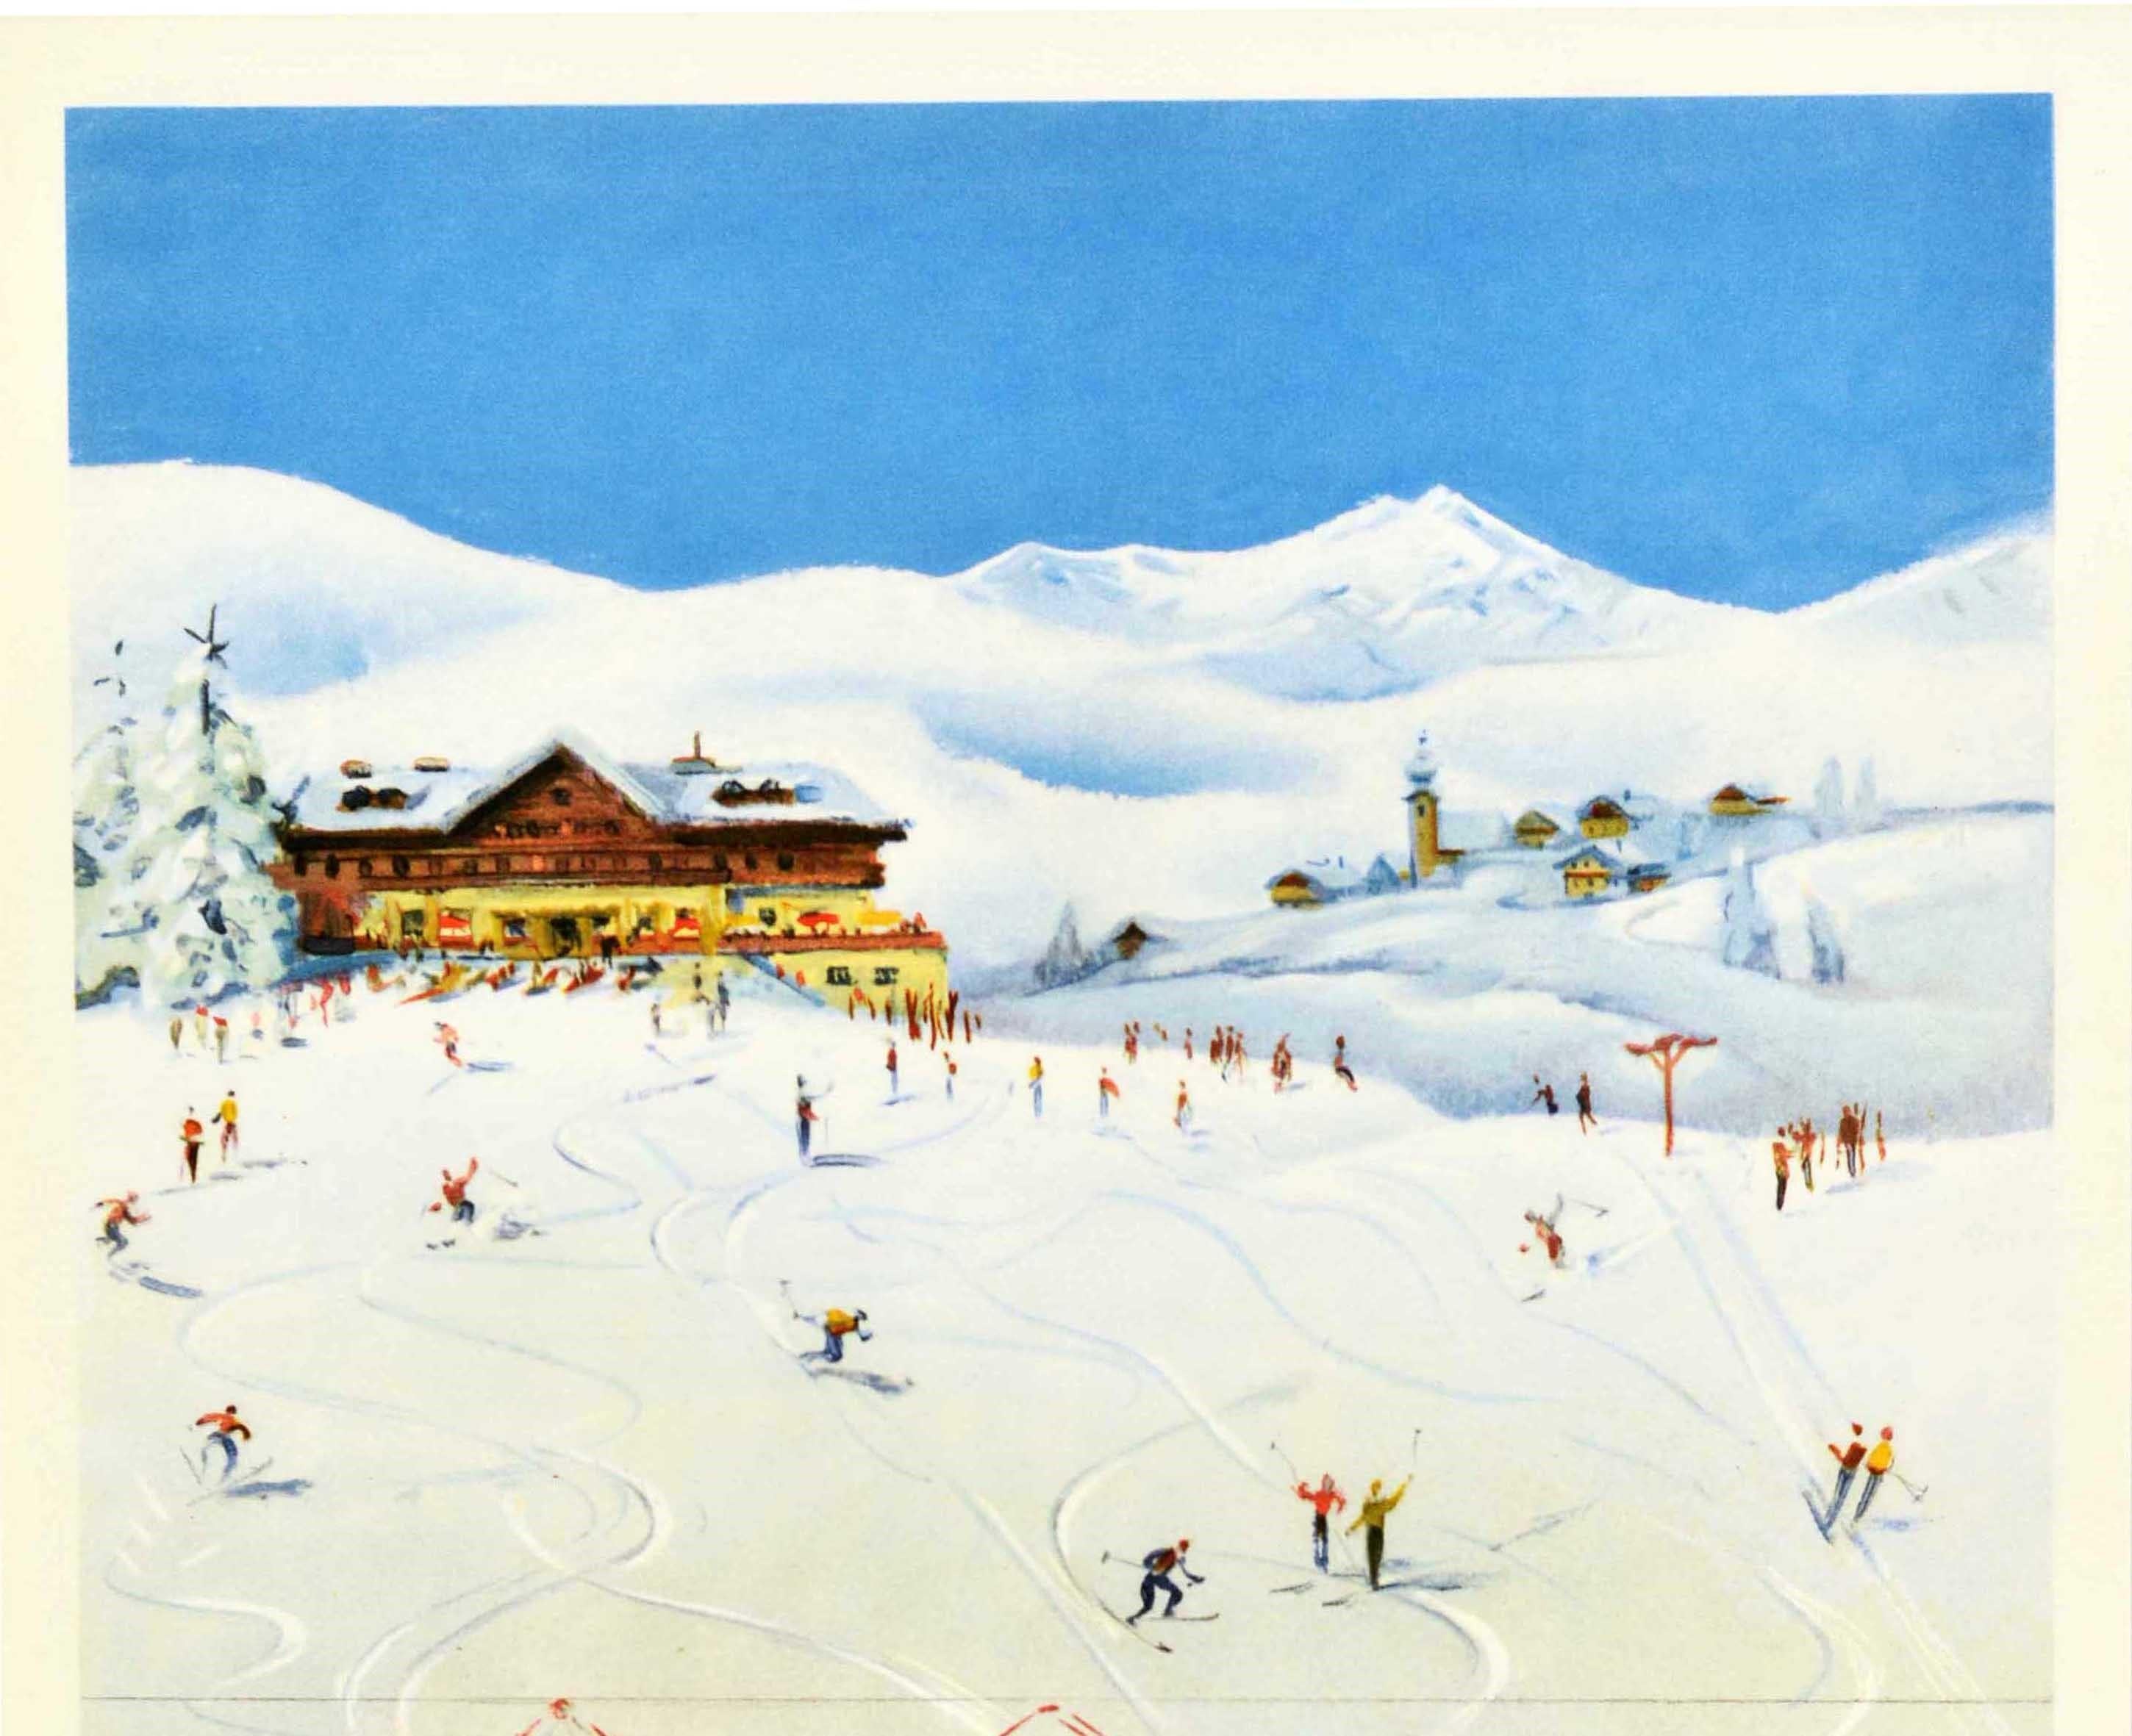 Original vintage winter sport and ski travel poster - Autriche OBB Chemins de Fer Federaux Autrichiens / Austria OBB Austrian Federal Railways - featuring skiers on a snowy hill skiing down and taking a drag lift up on the side in front of a snow